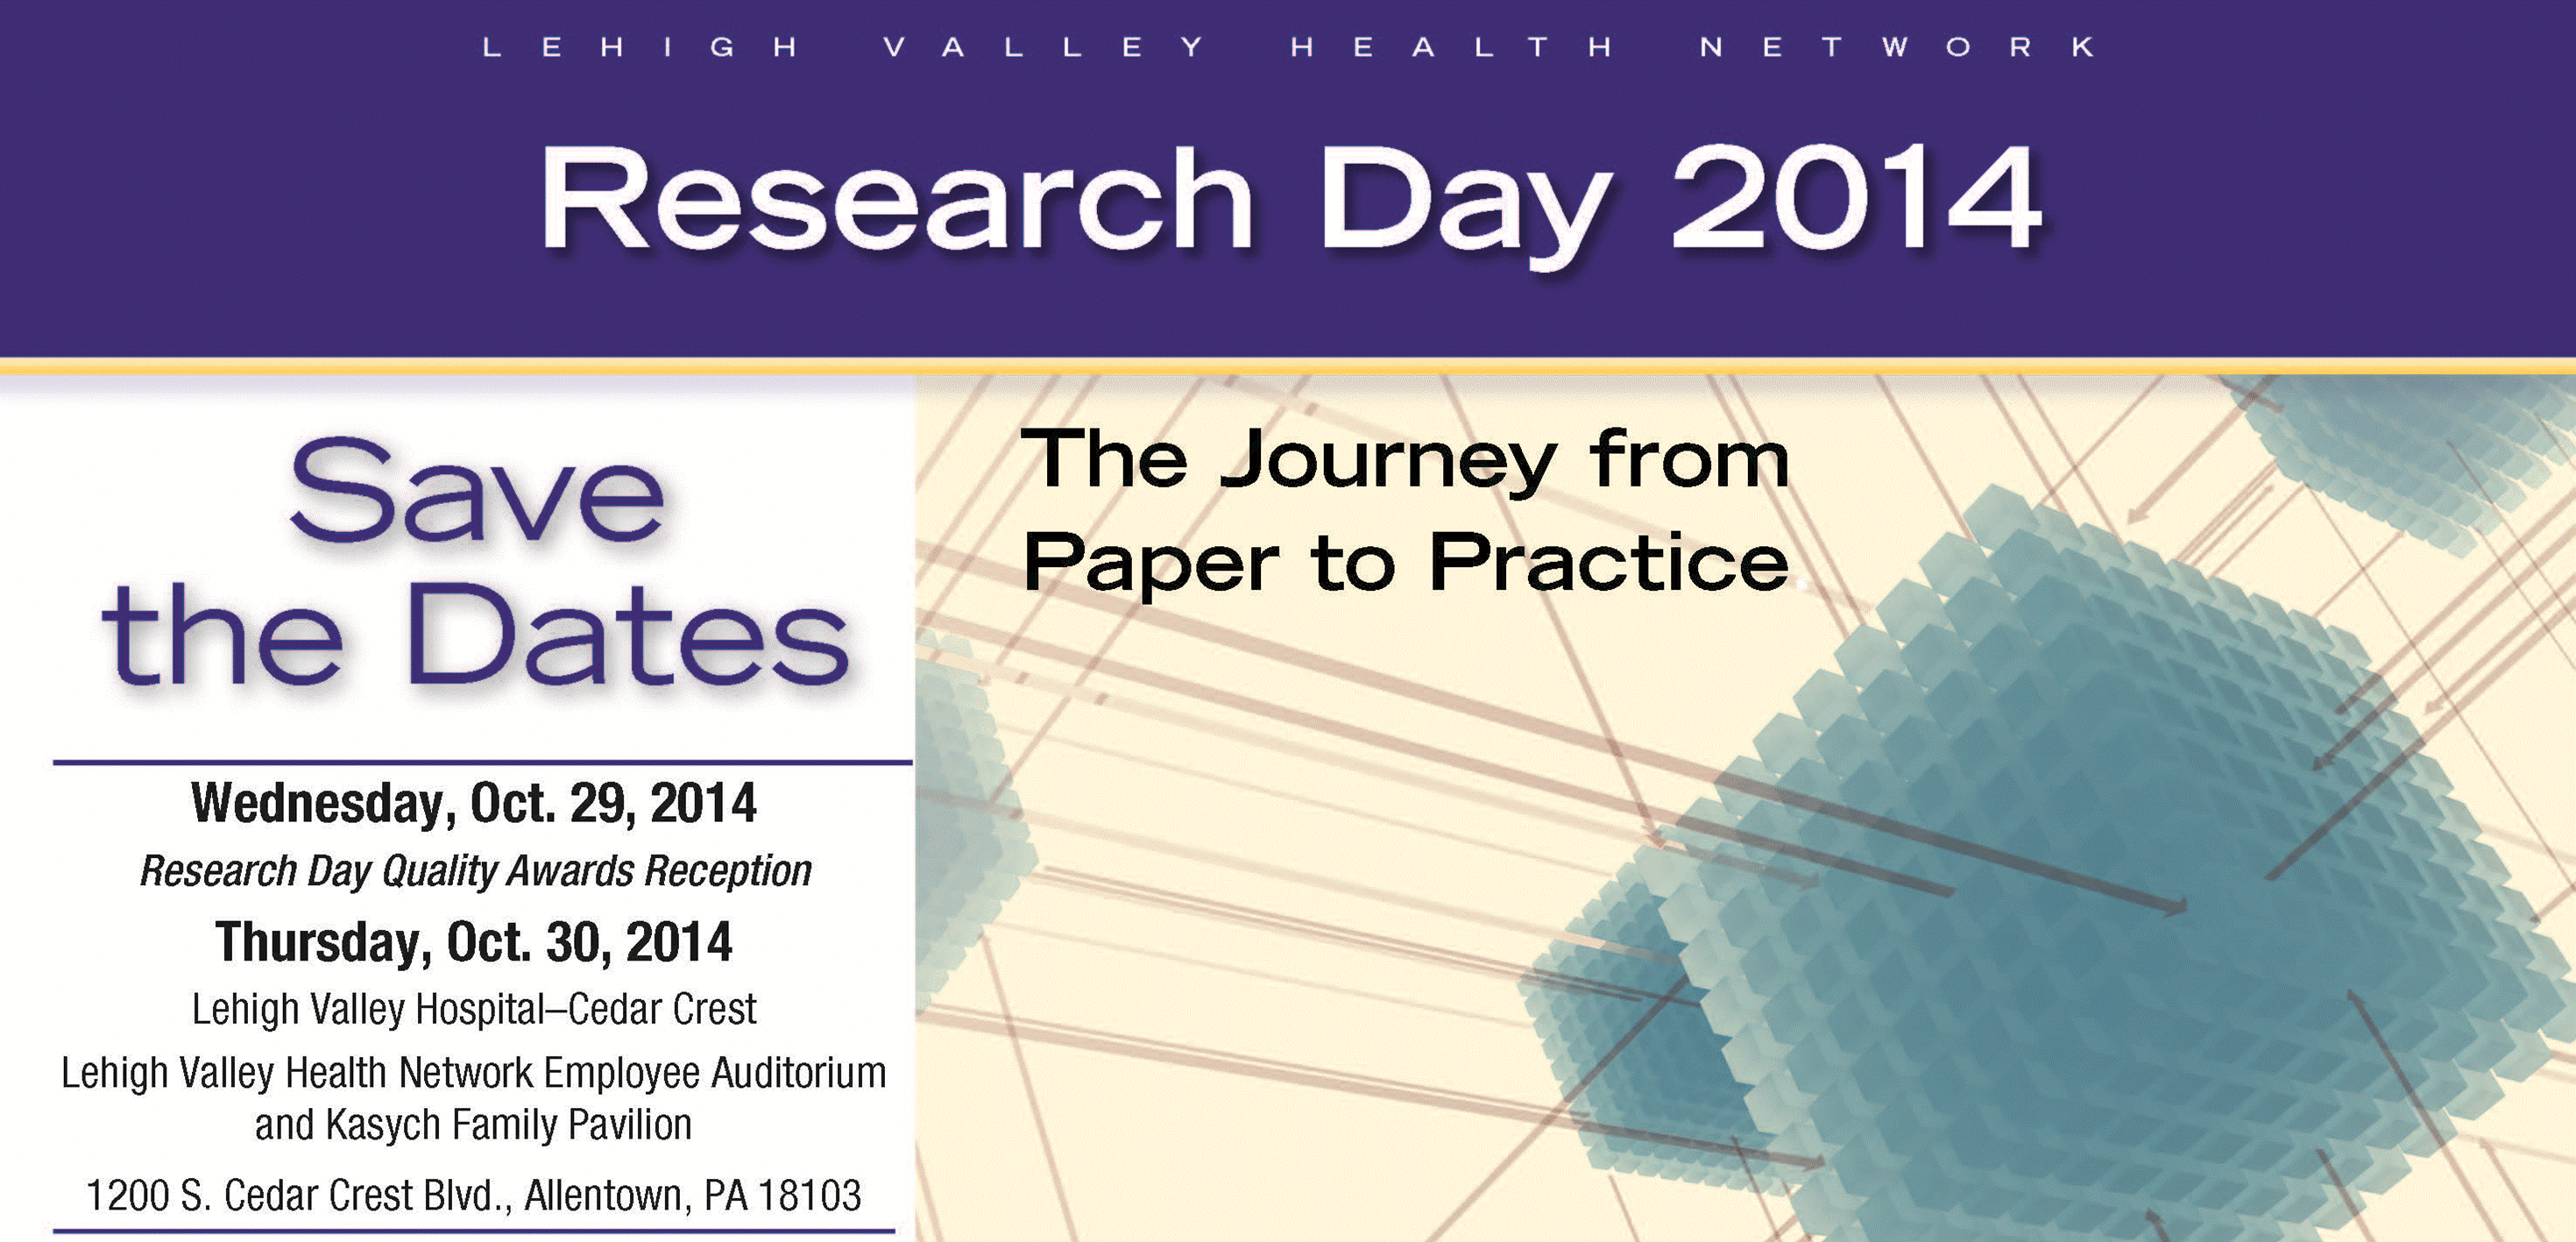 Research Day 2014: The Journal from Paper to Practice